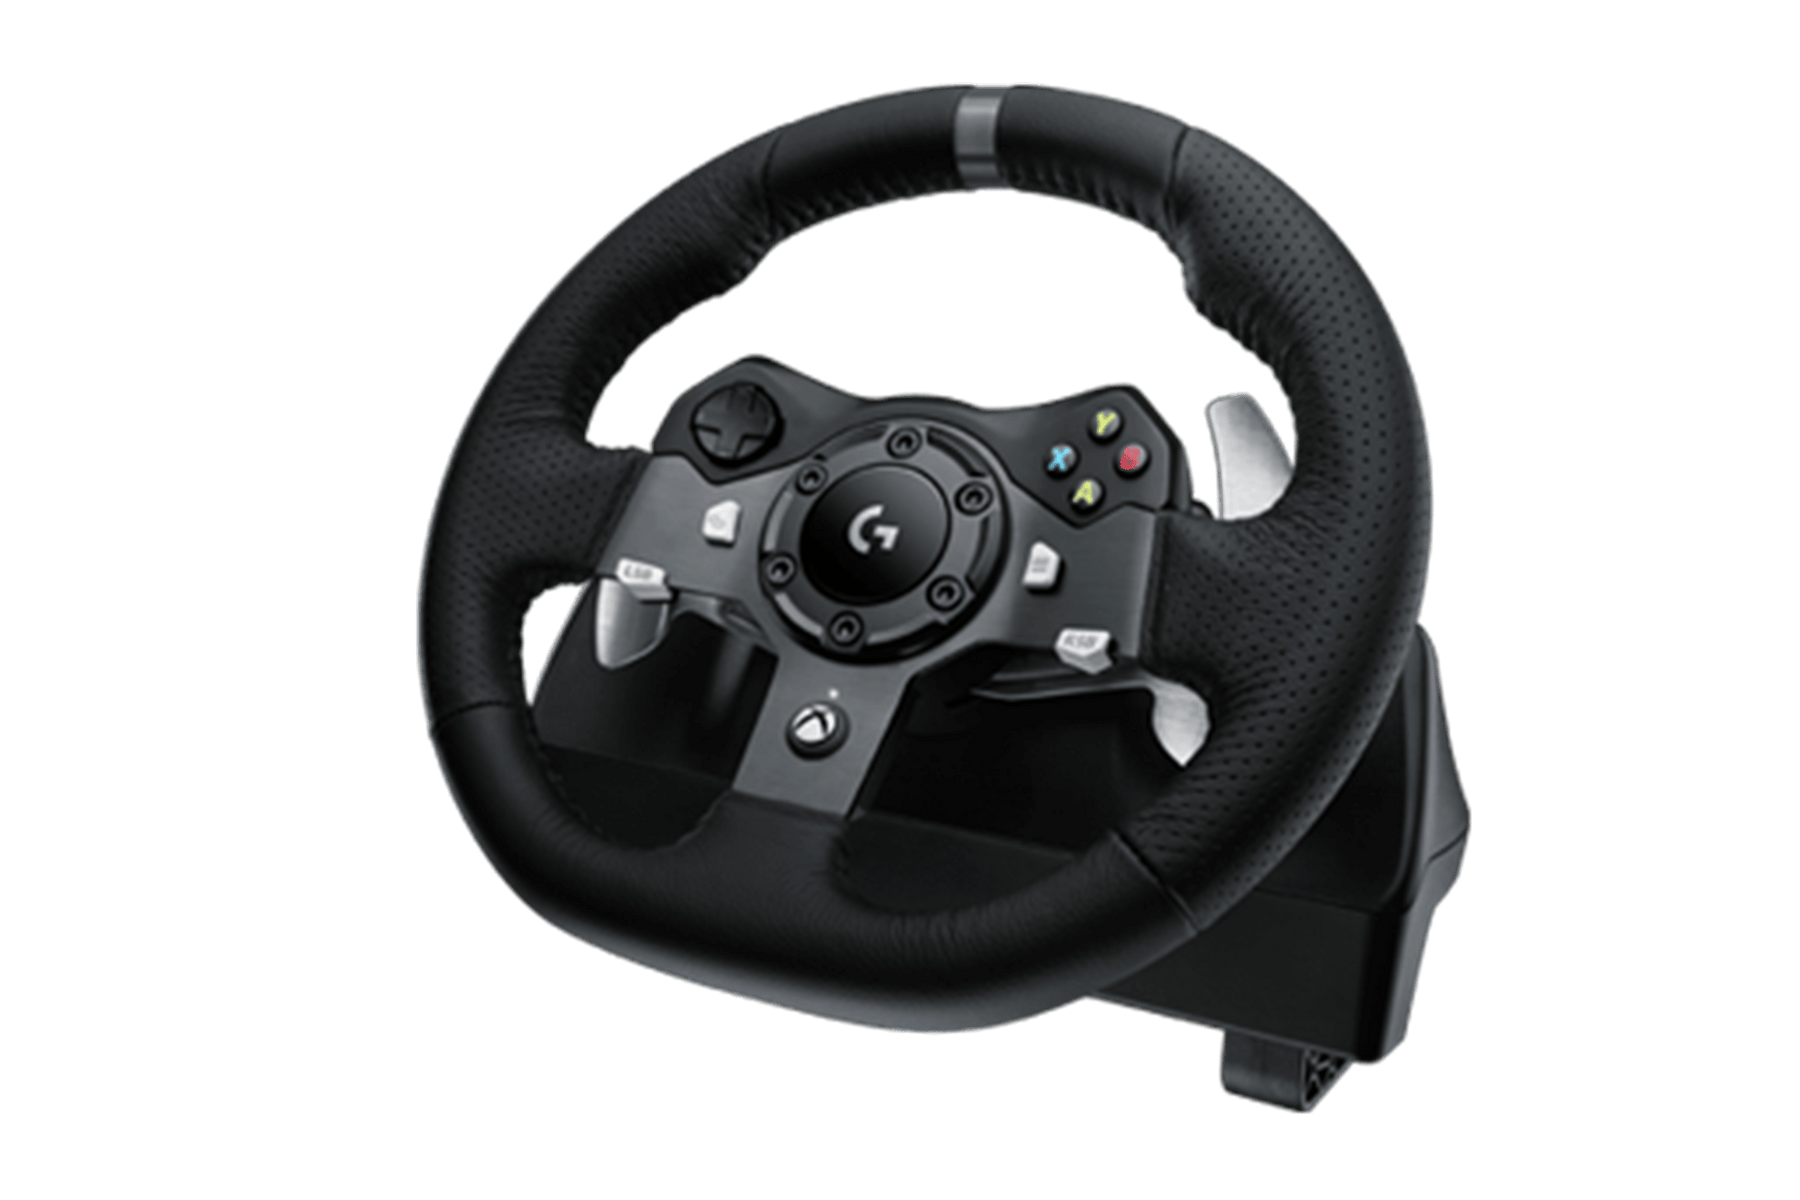 G920 Driving Wheel For Xbox One And PC – Trak Racer